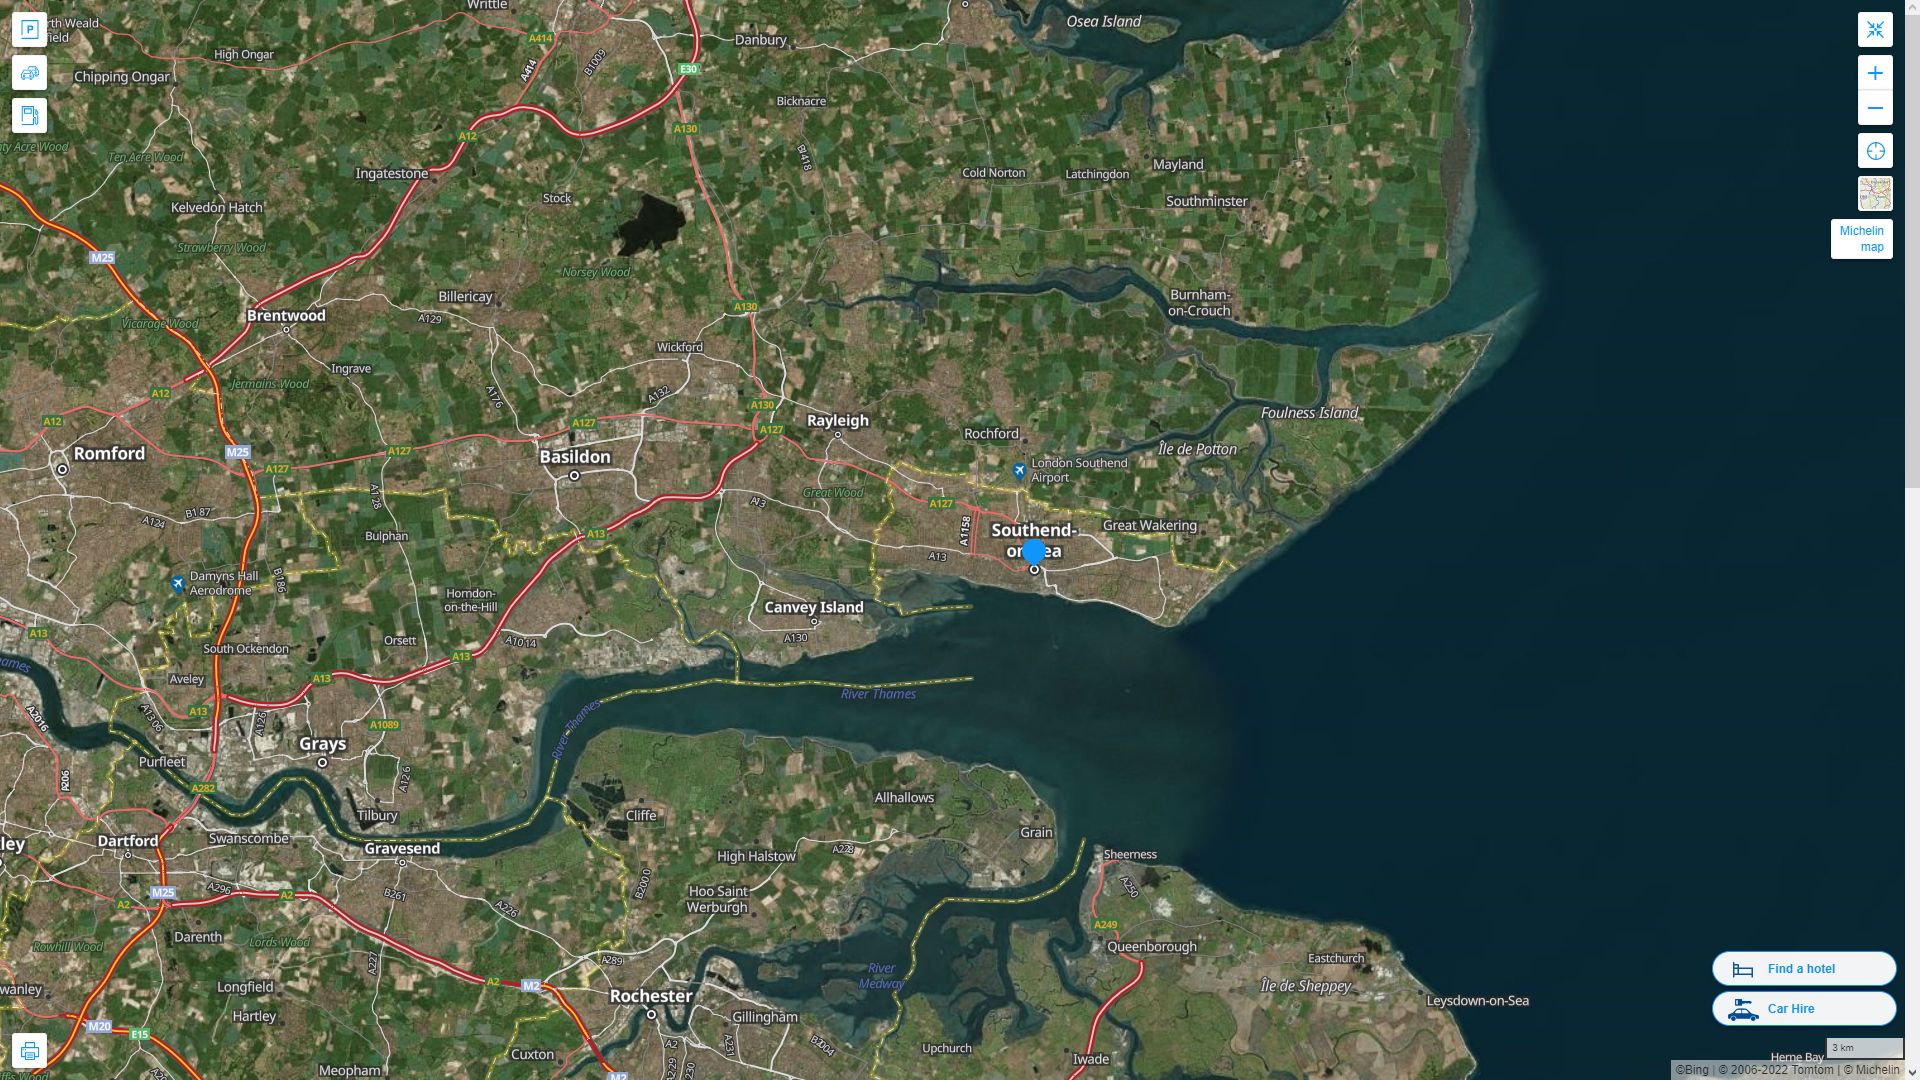 Southend on Sea Highway and Road Map with Satellite View